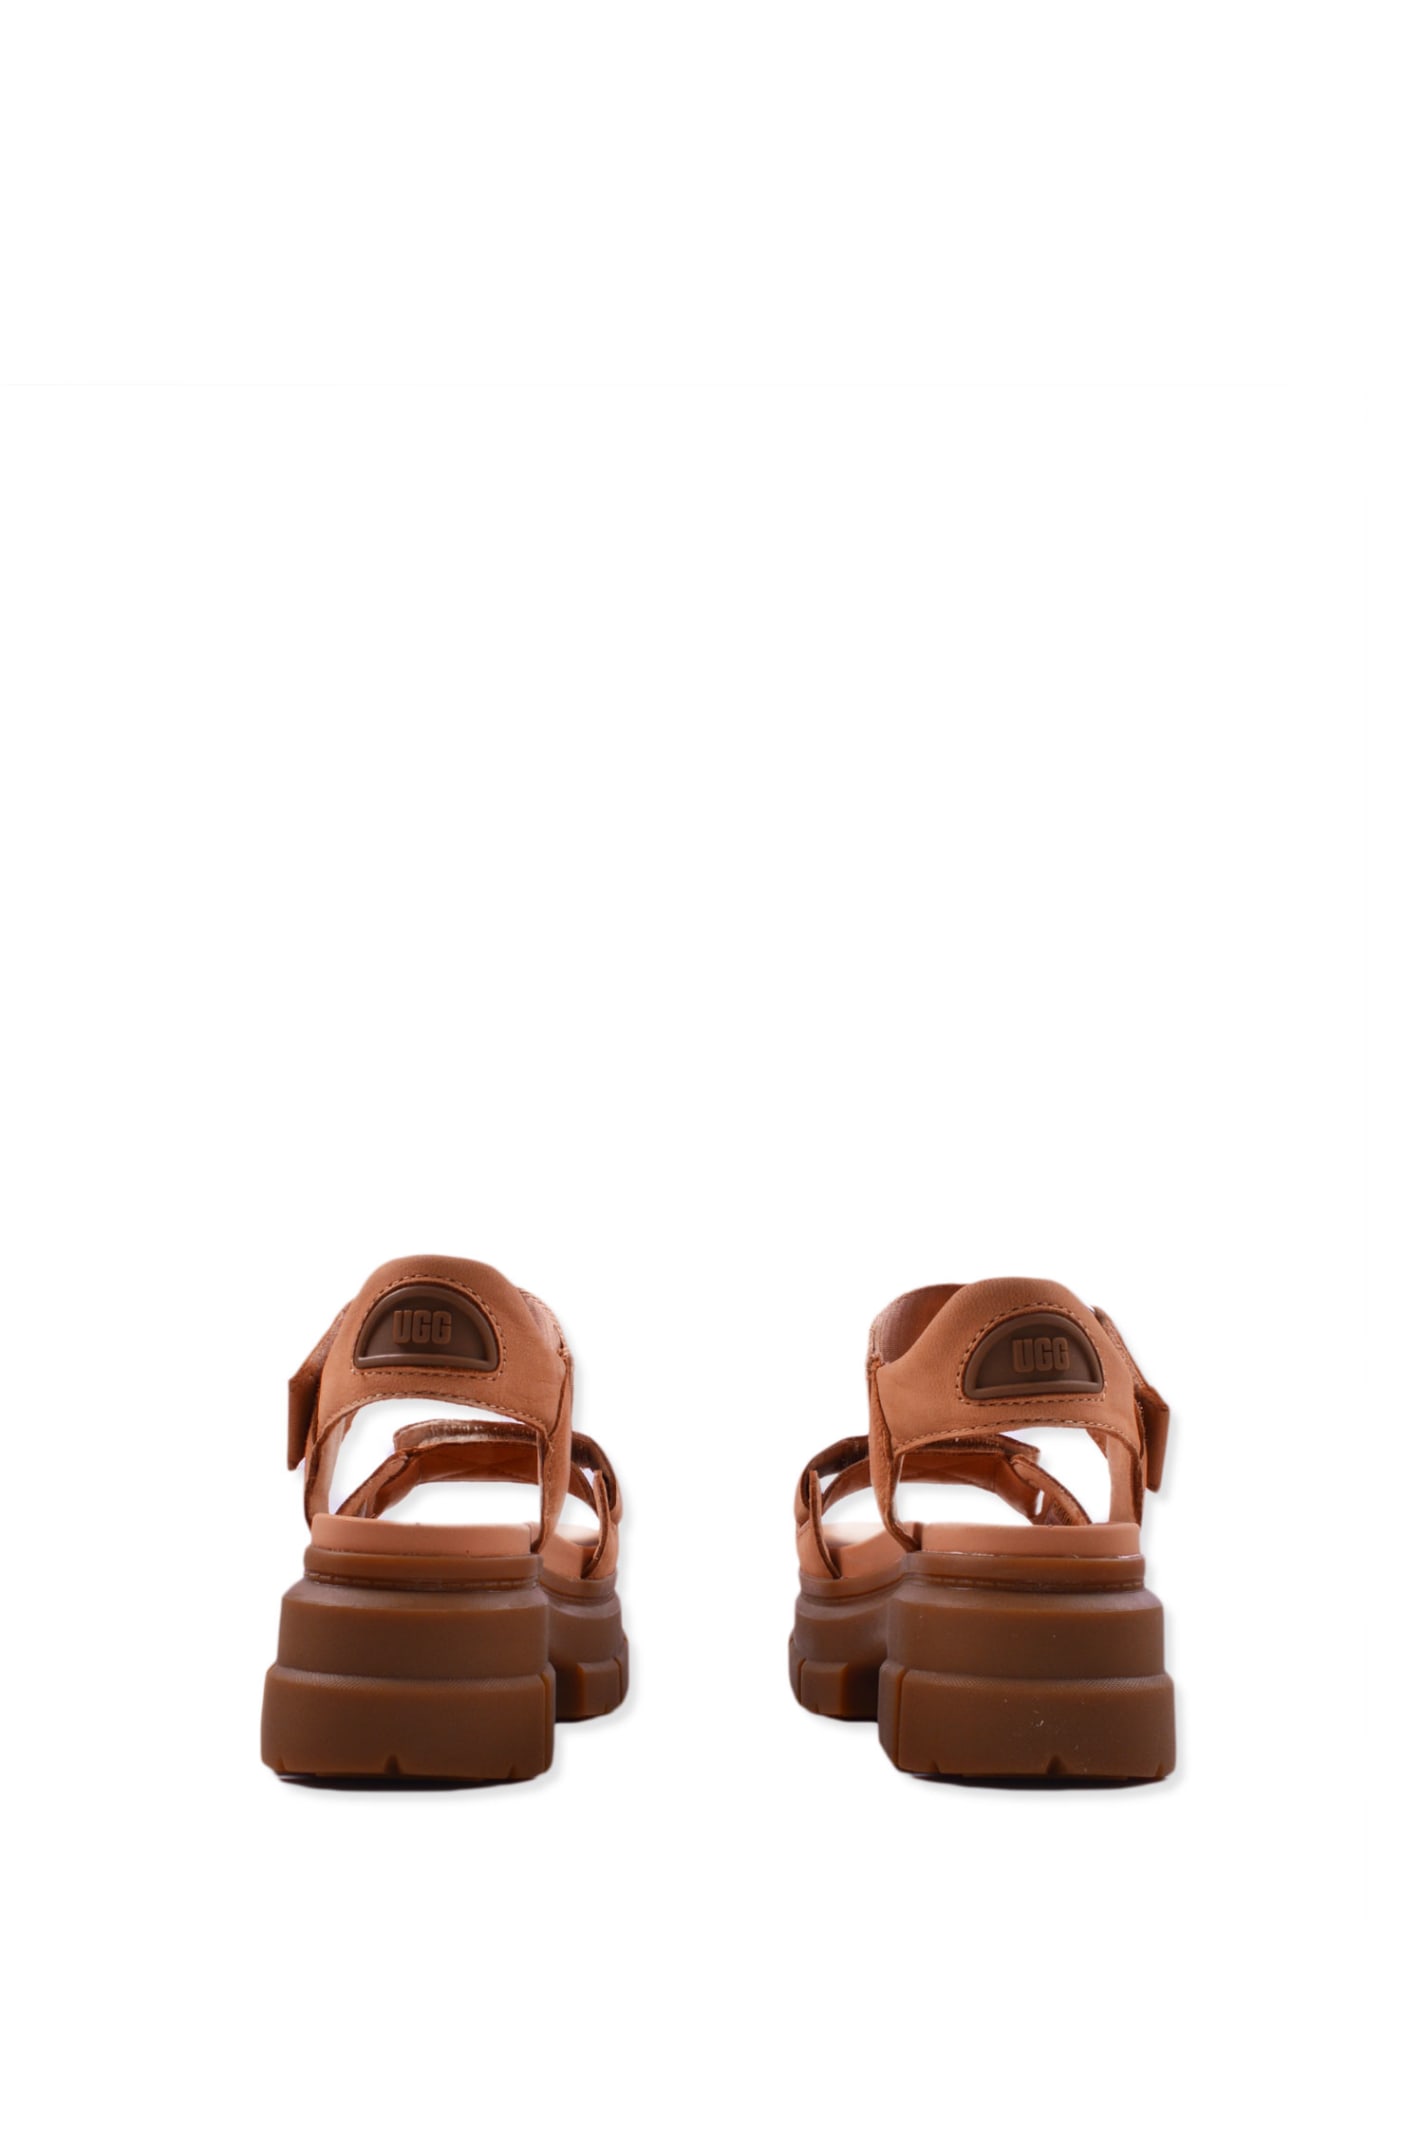 Shop Ugg Fabric Sandals In Brown